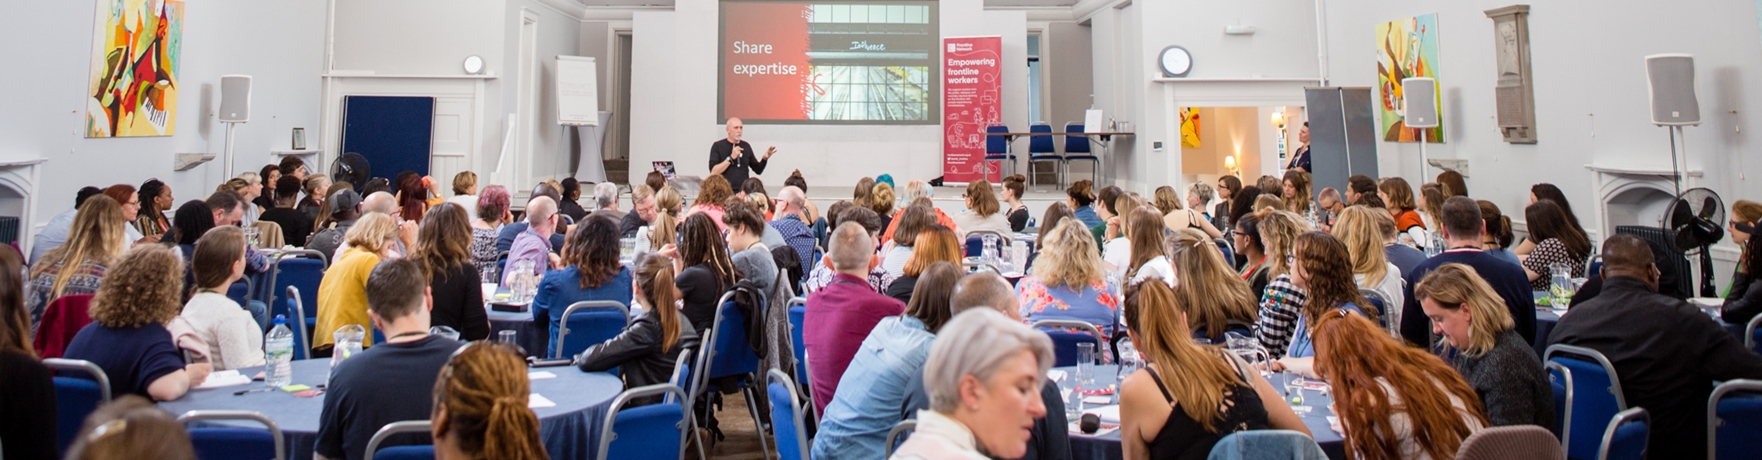 2021 Frontline Network Annual Conference